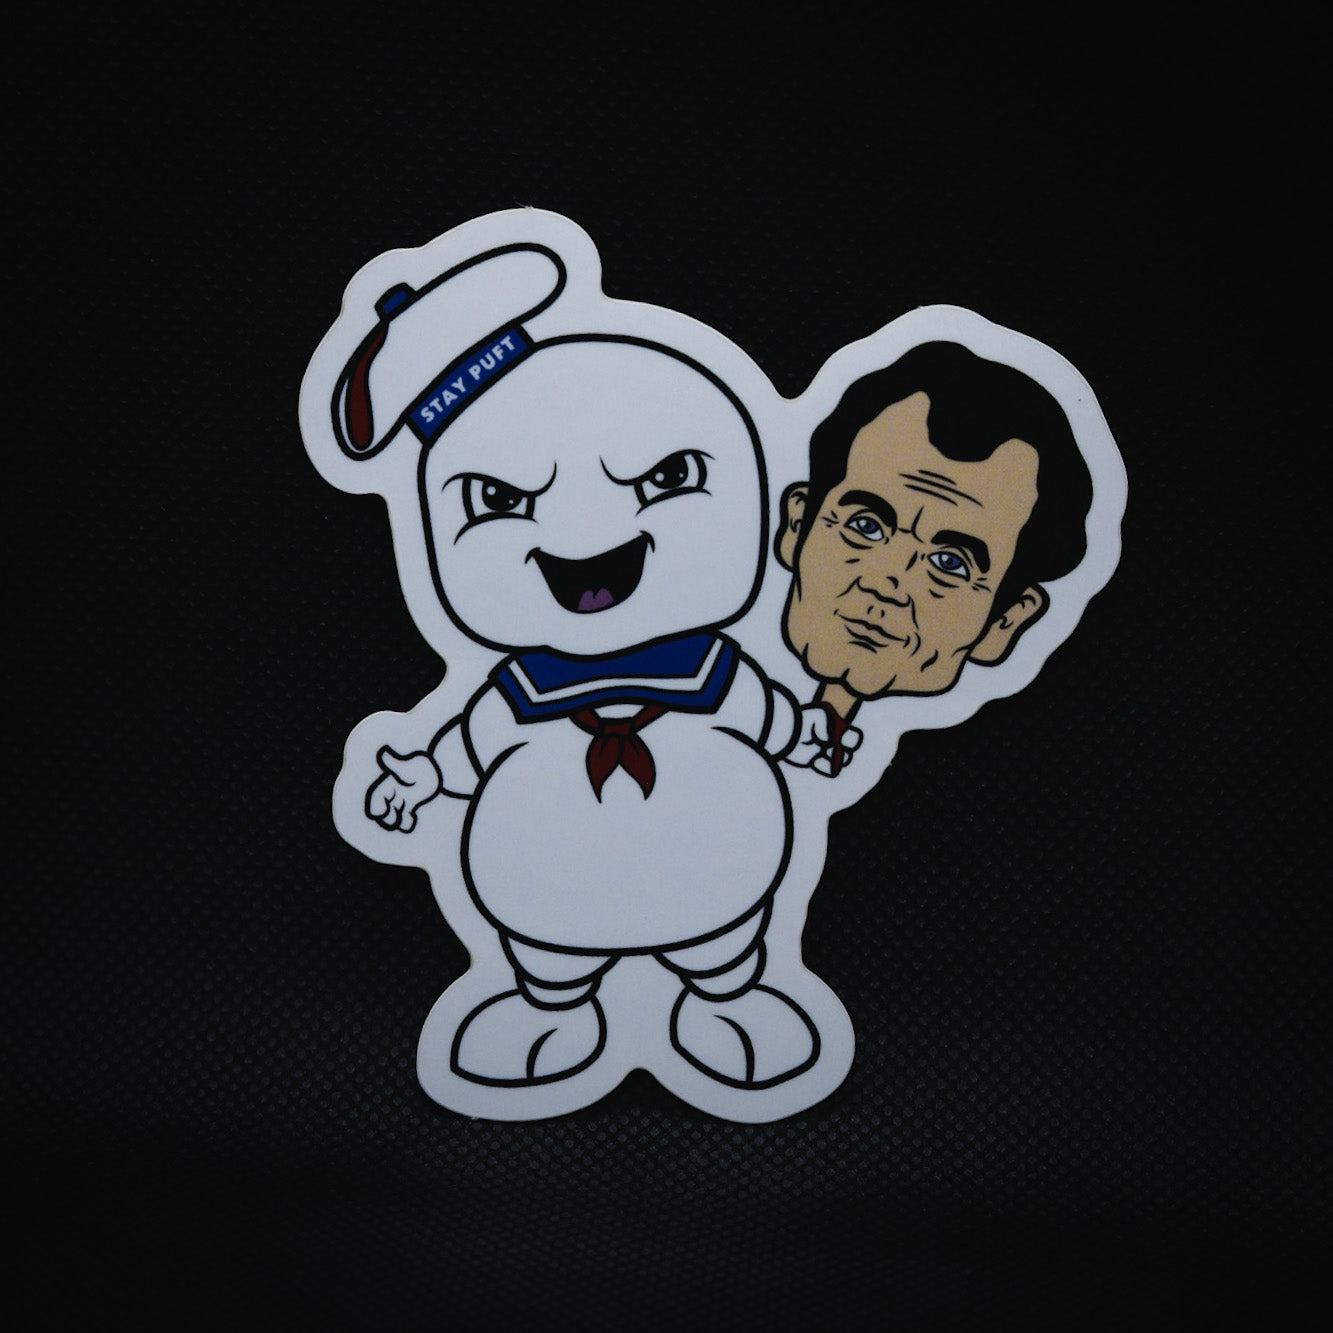 Stay Puft Marshmallow Man with Bill Murray's Head Sticker